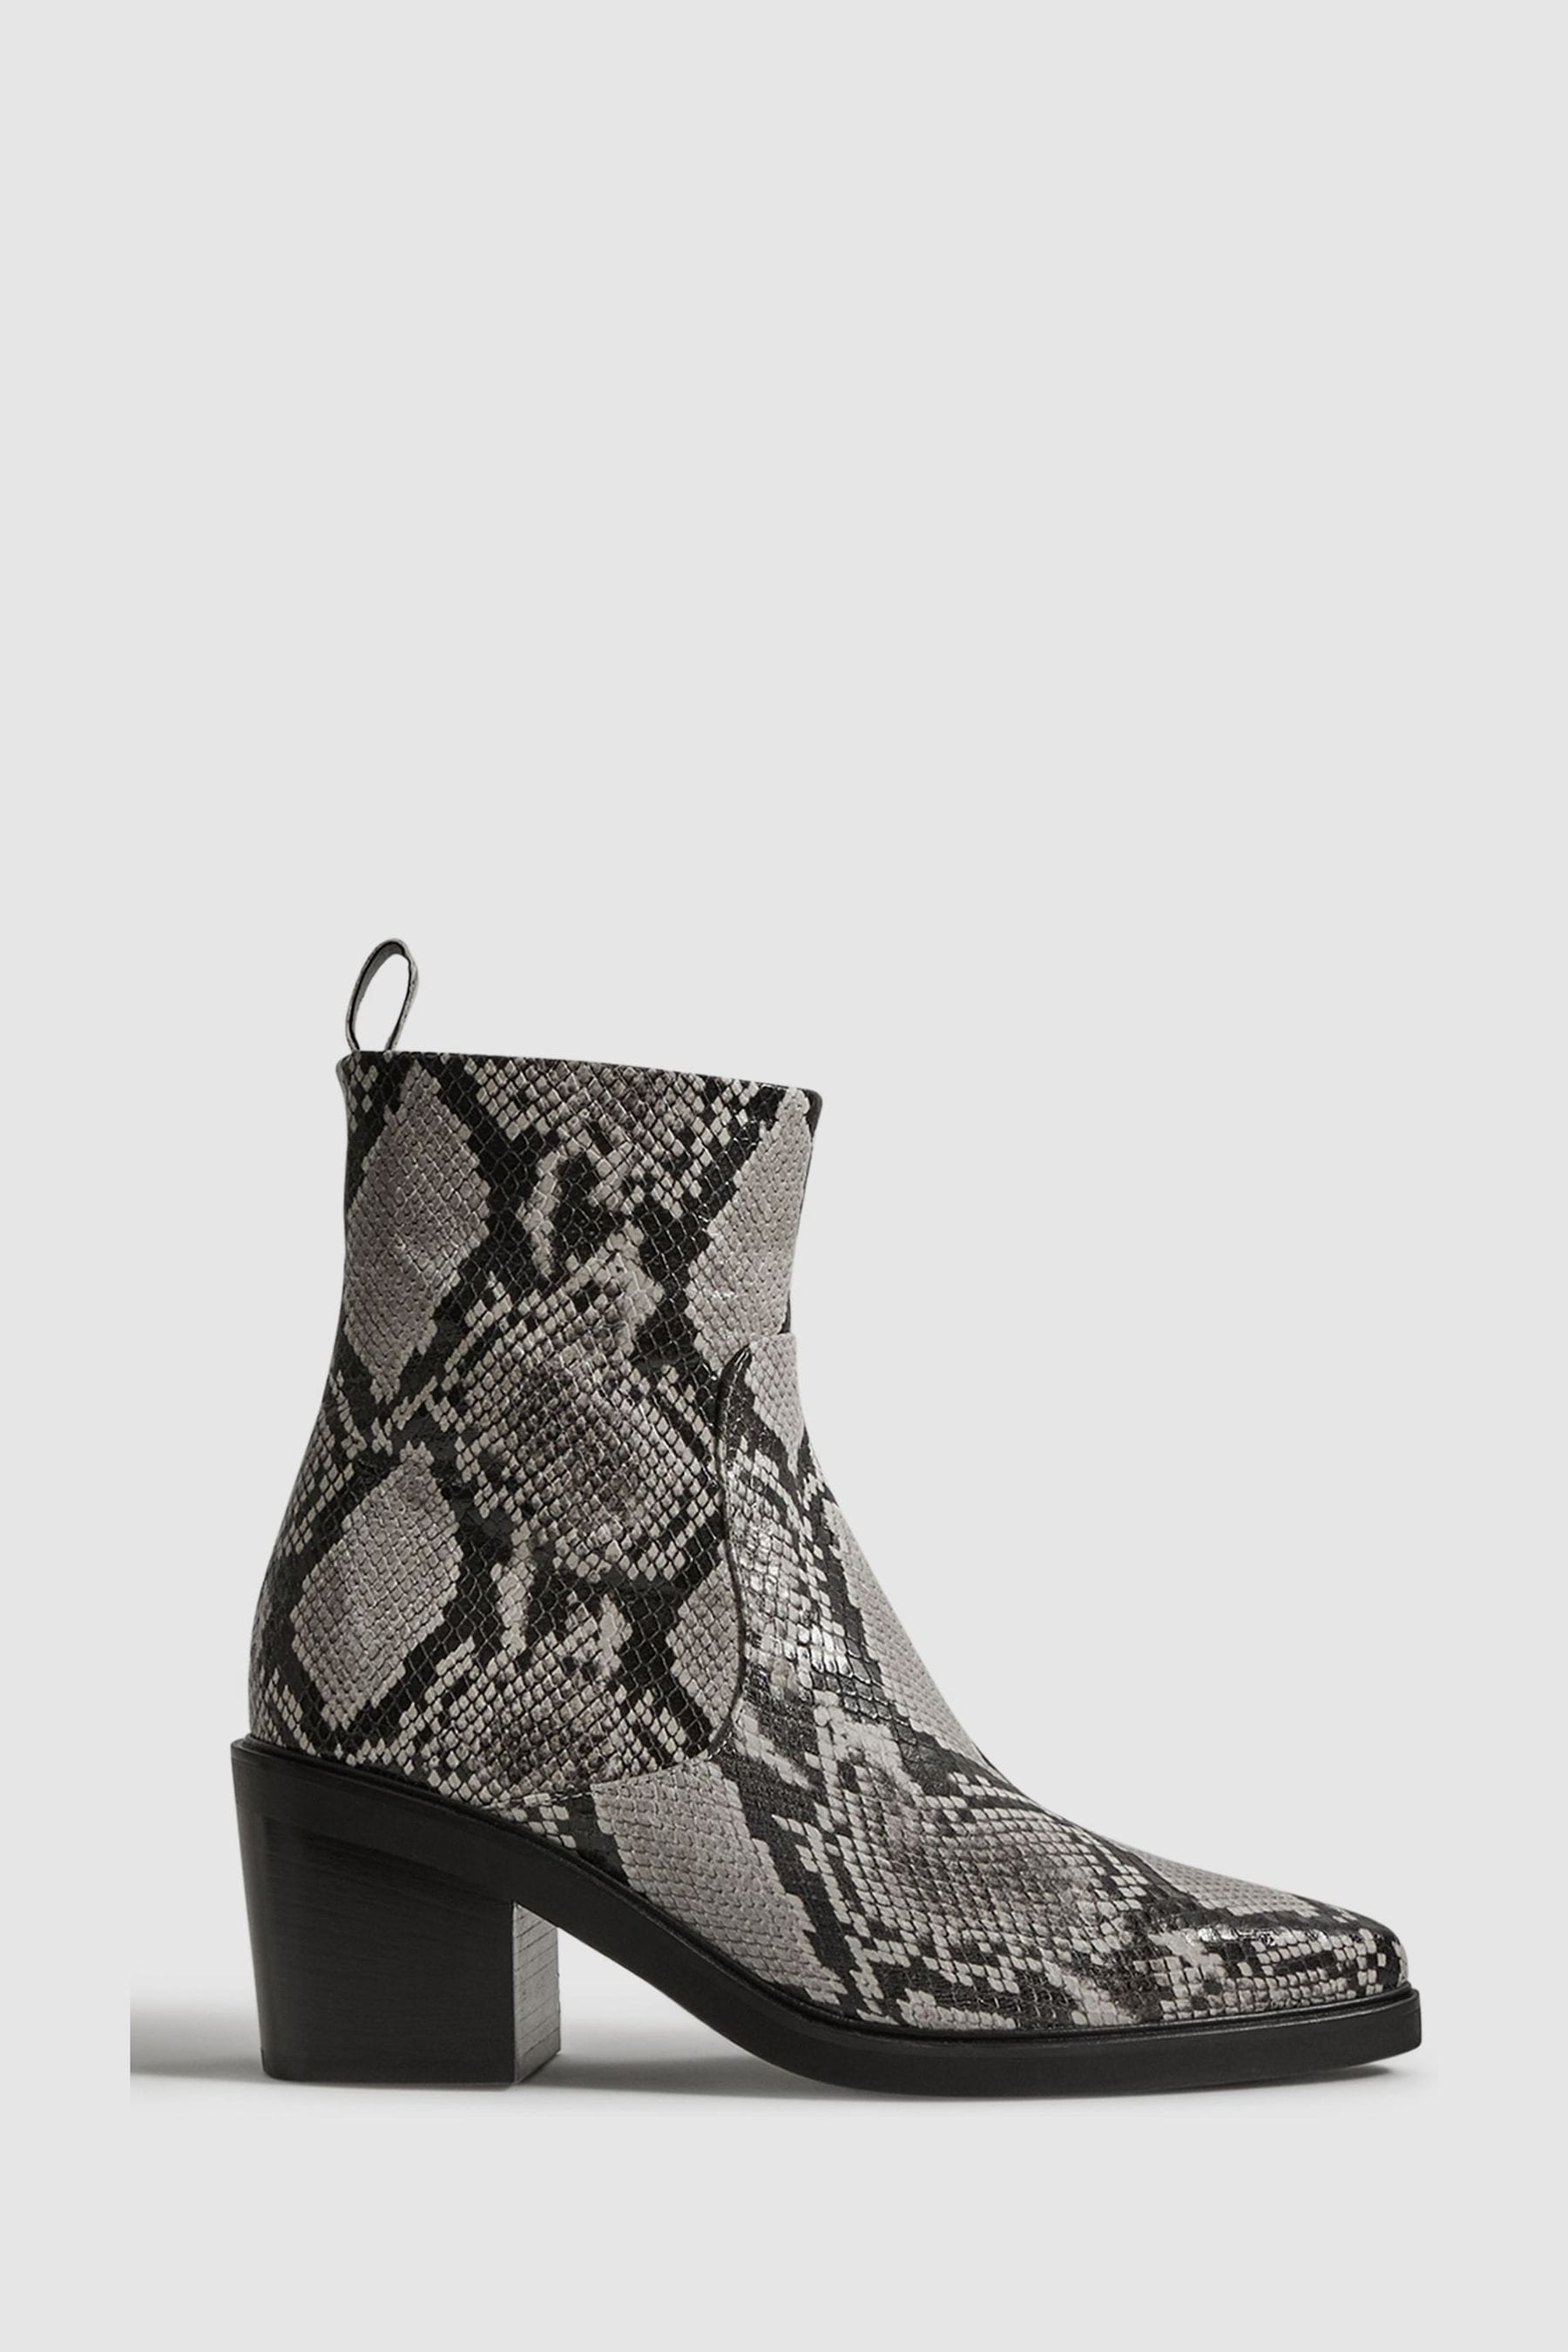 Reiss Sienna - Snake Leather Heeled Western Boots, Us 8